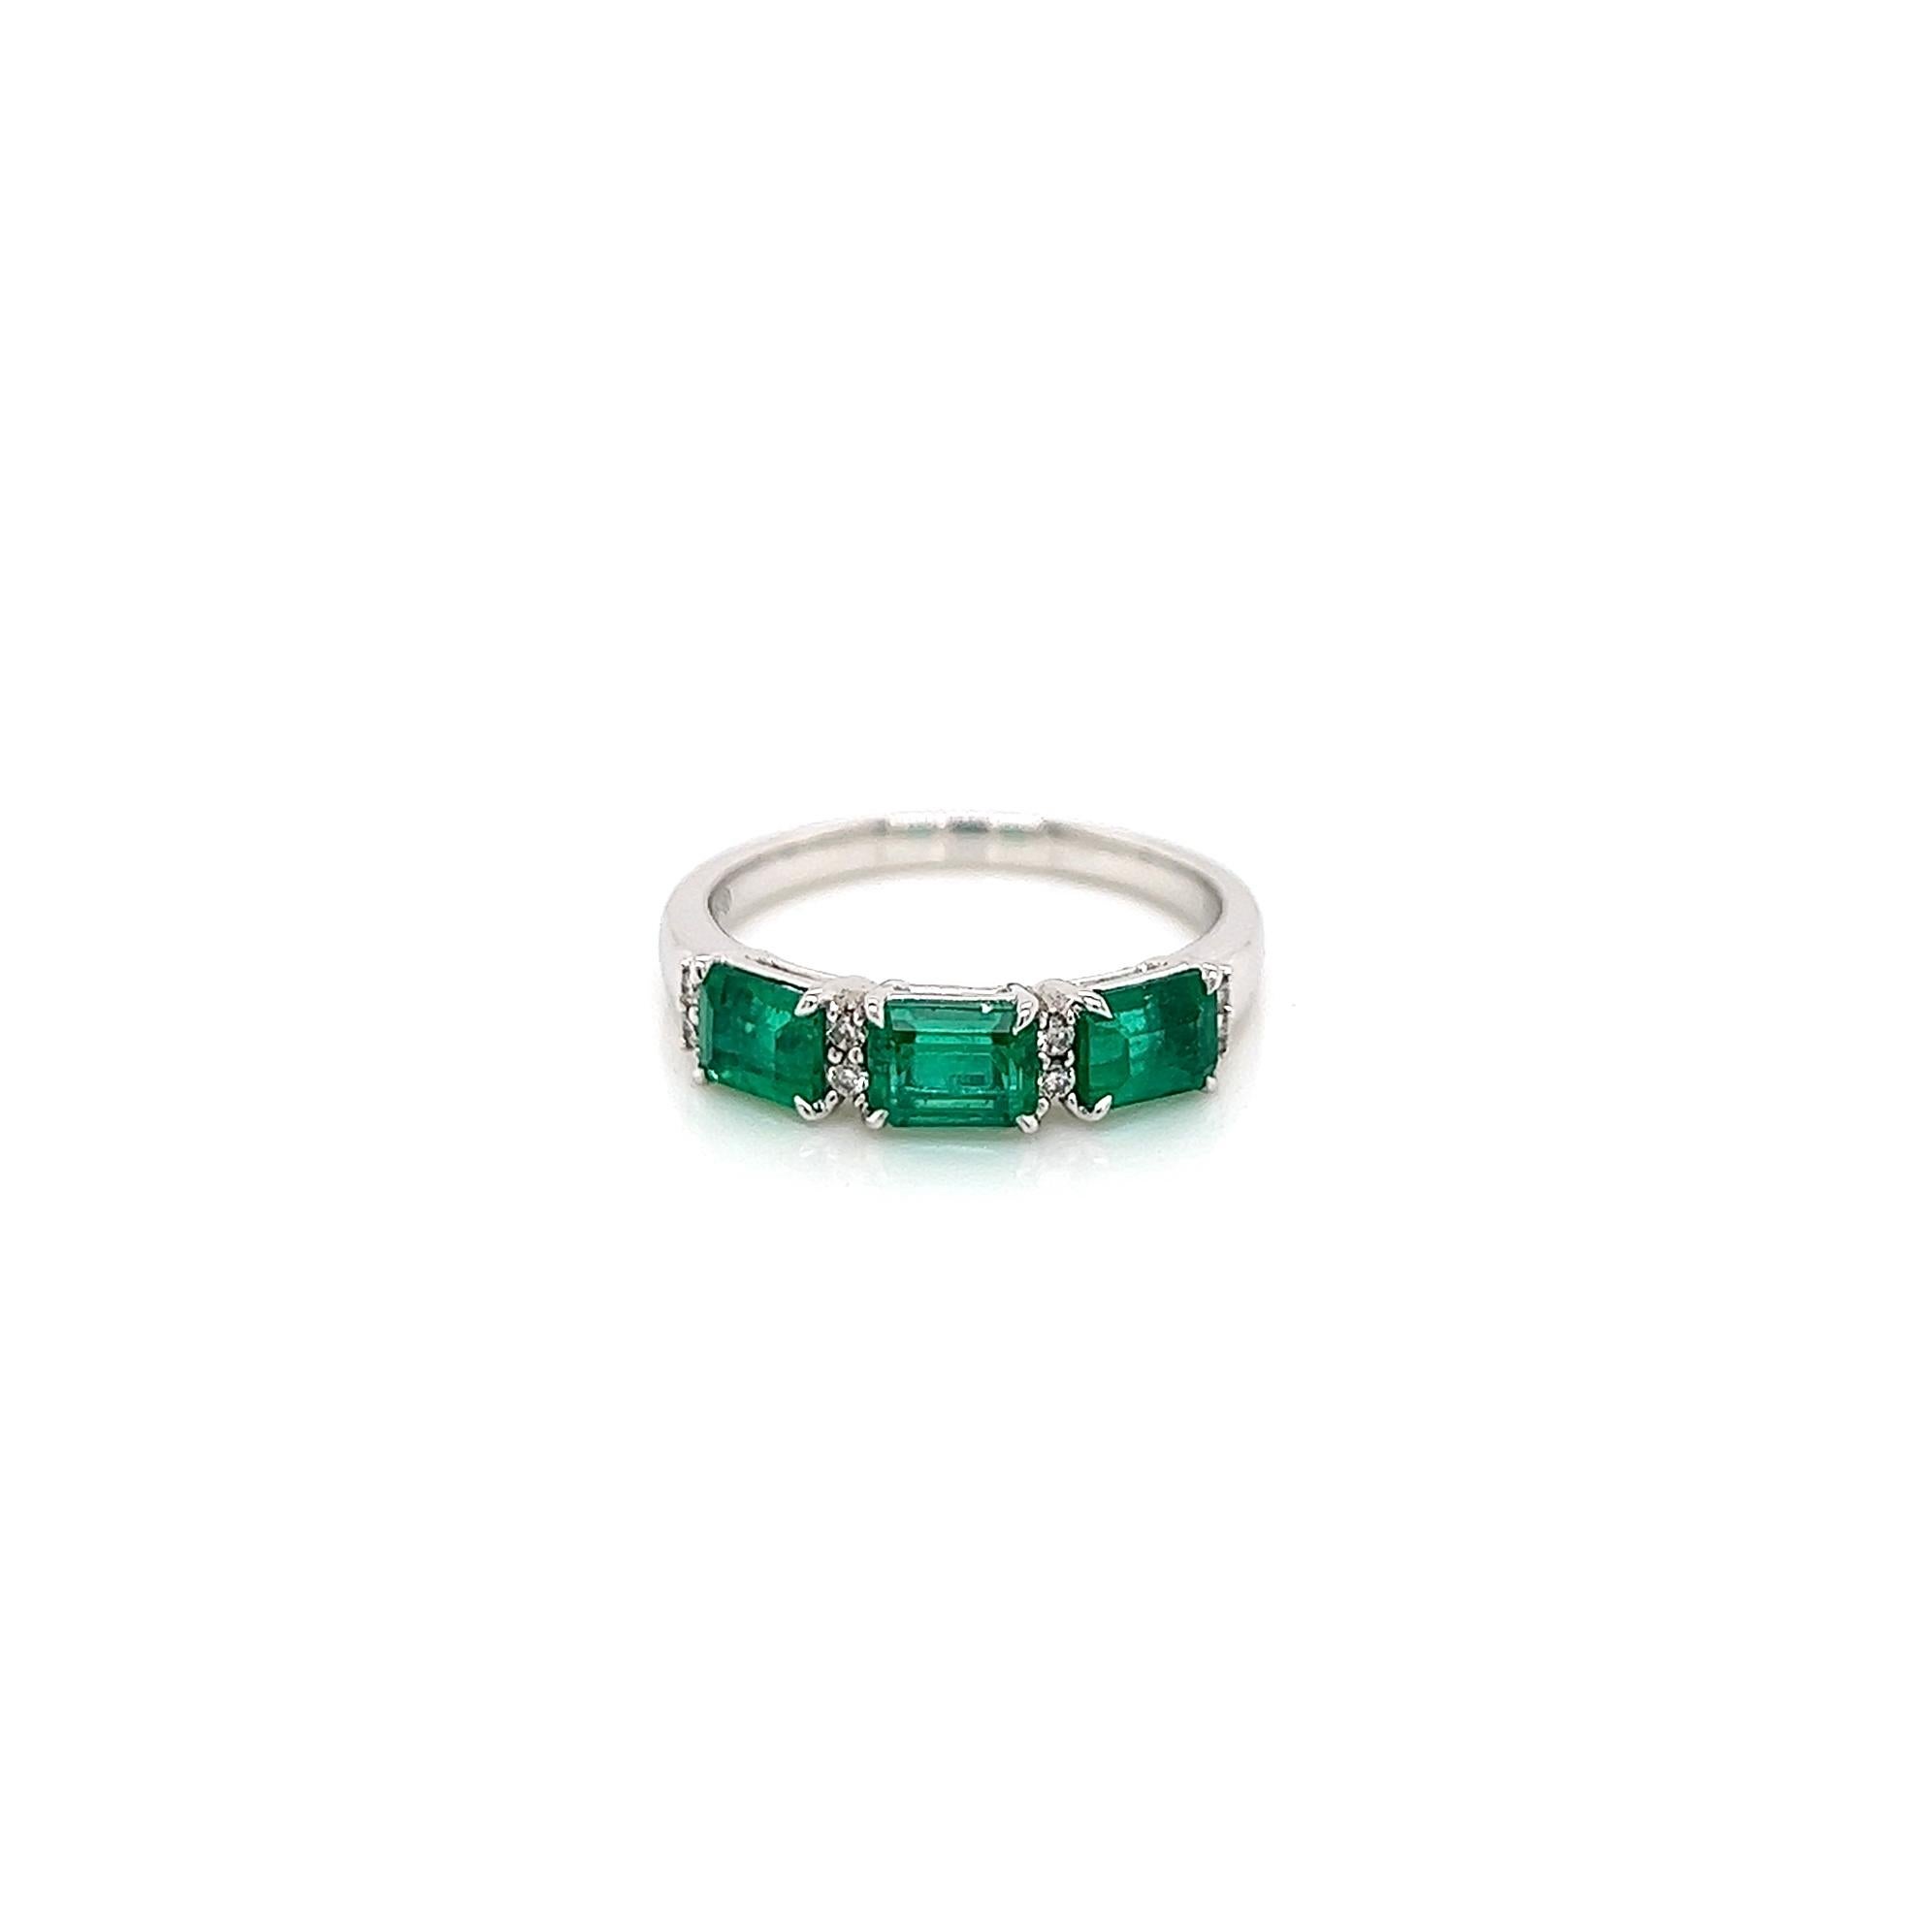 1.29Carat Green Emerald and Diamond Ladies Ring

-Metal Type: 18K White Gold
-1.29Carat Emerald Cut Green Emerald
-0.08Carat Round Side Natural Diamonds
-Size 6.5

Made in New York City